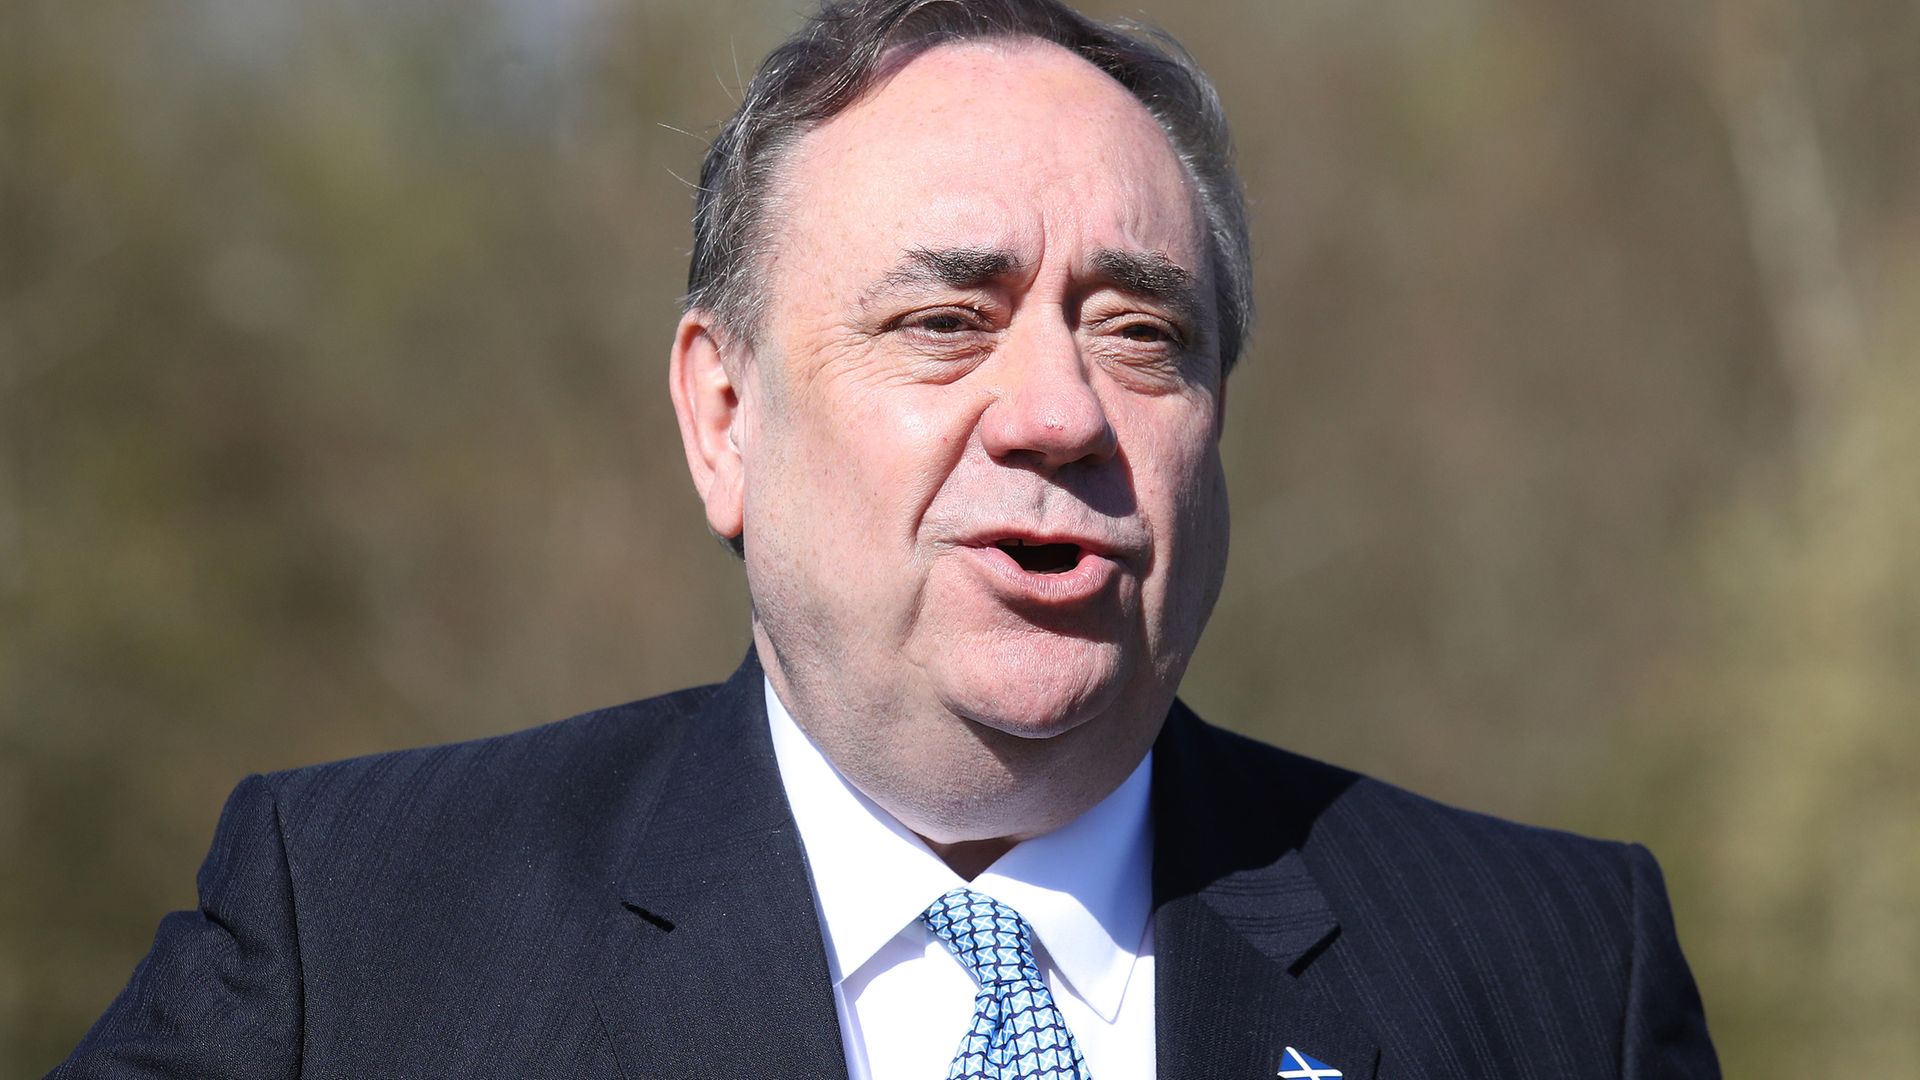 ALBA Party leader Alex Salmond at their party manifesto launch at the Falkirk Wheel in Falkirk - Credit: PA